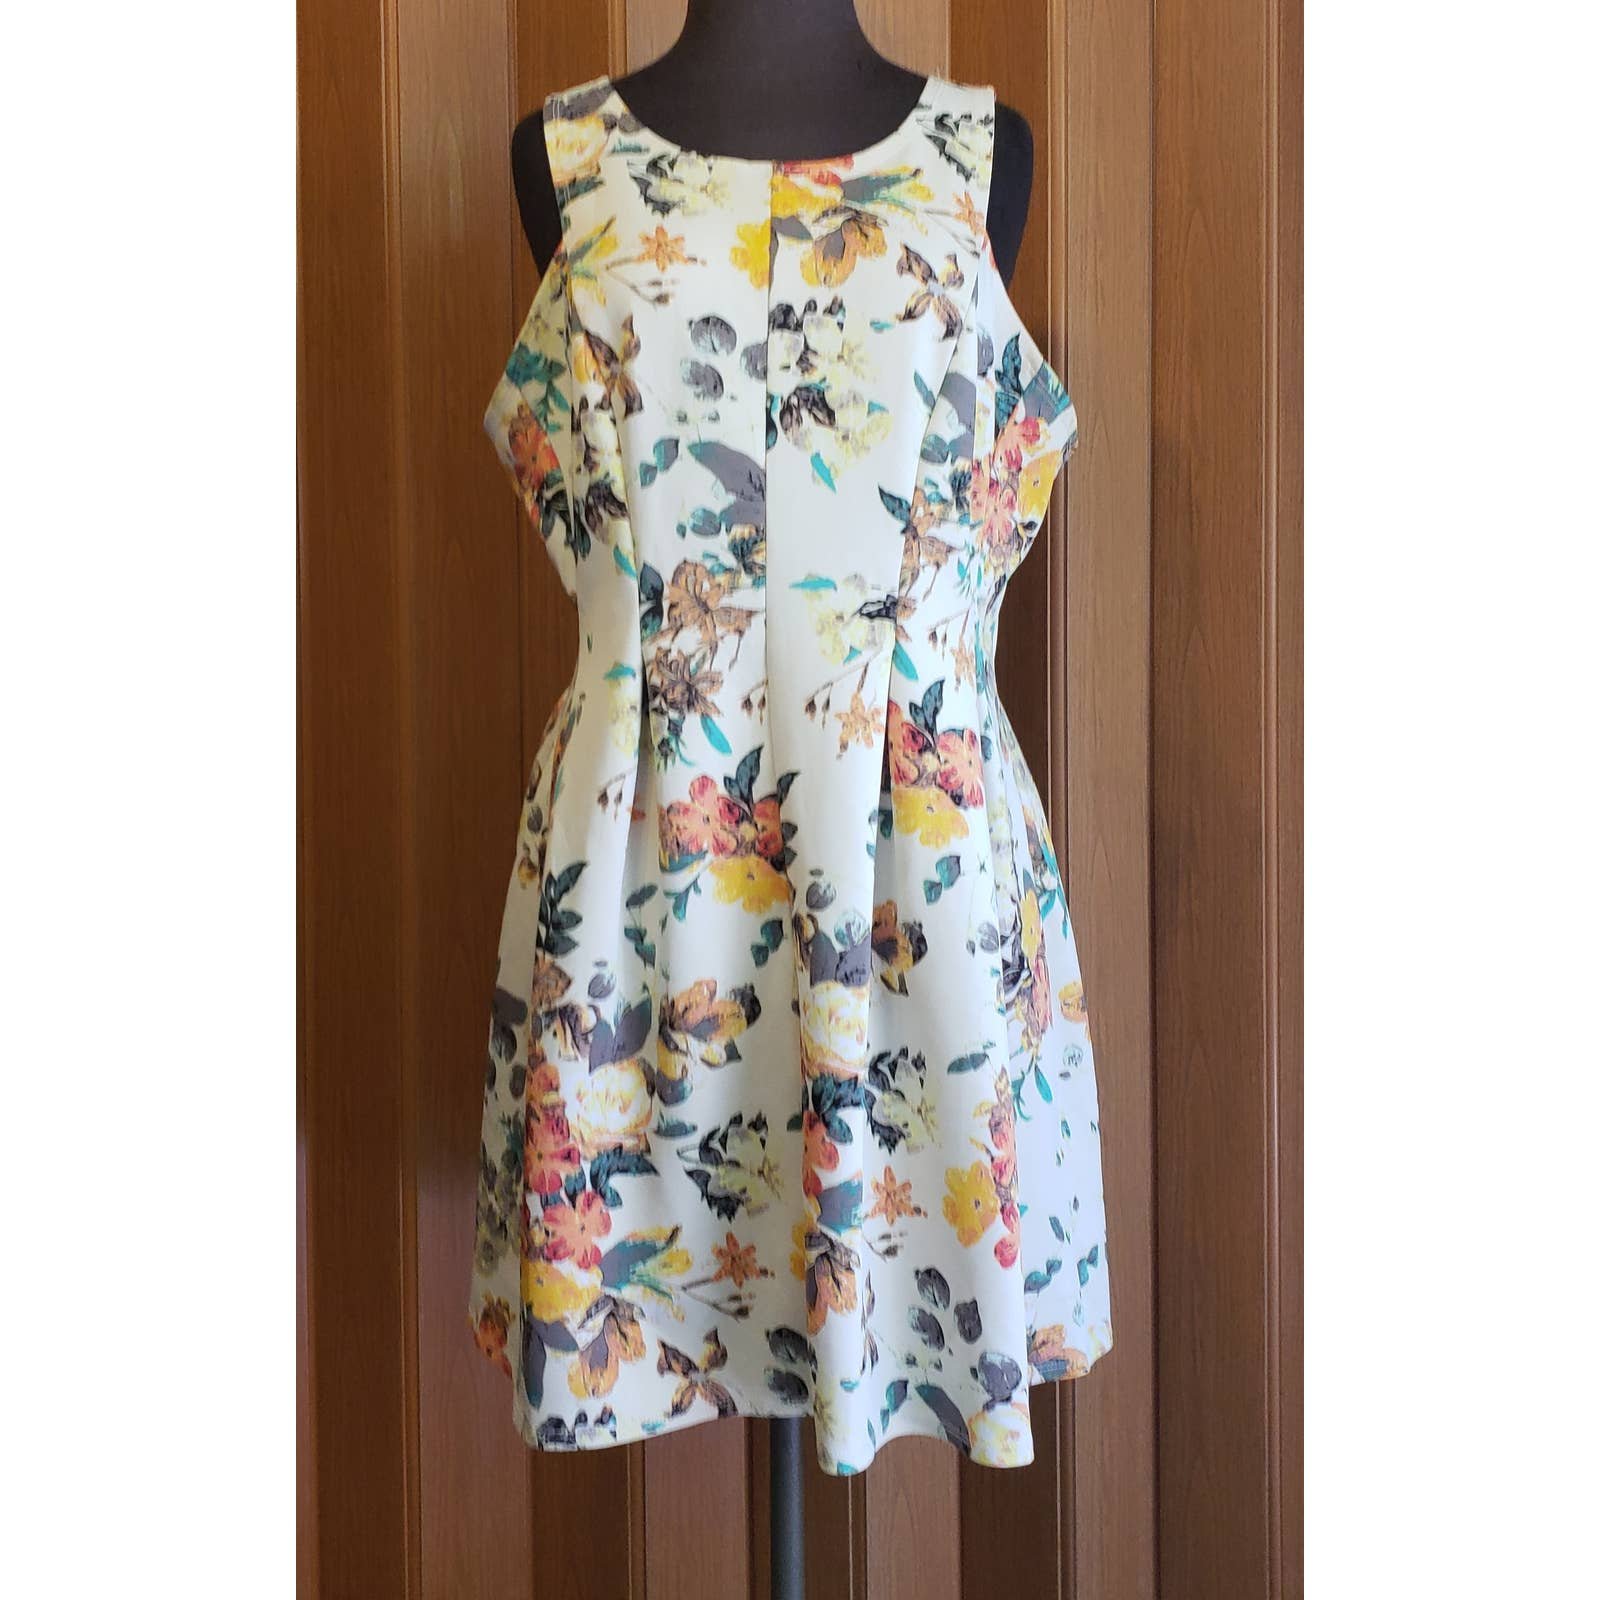 High quality Candies size XL sleeveless liberty floral print sundress l8rS6vVQs Counter Genuine 